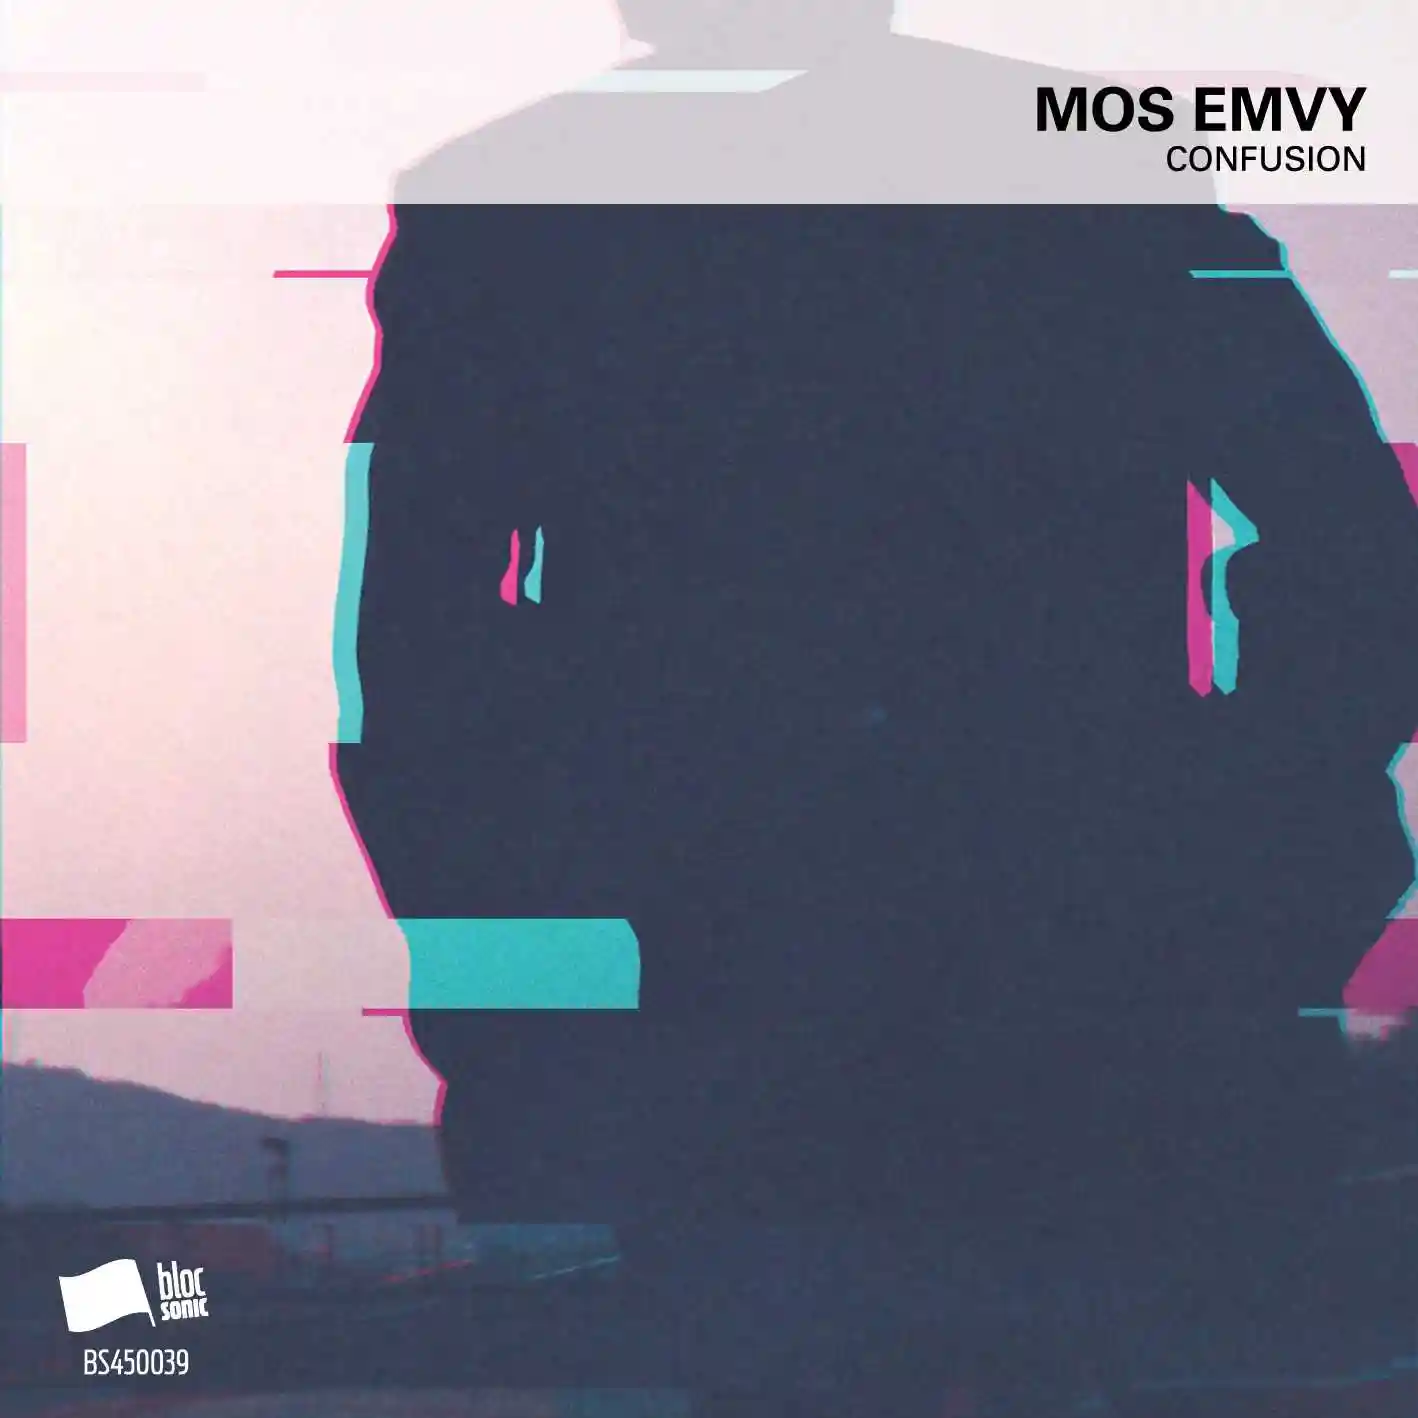 Album cover for “Confusion” by Mos Emvy